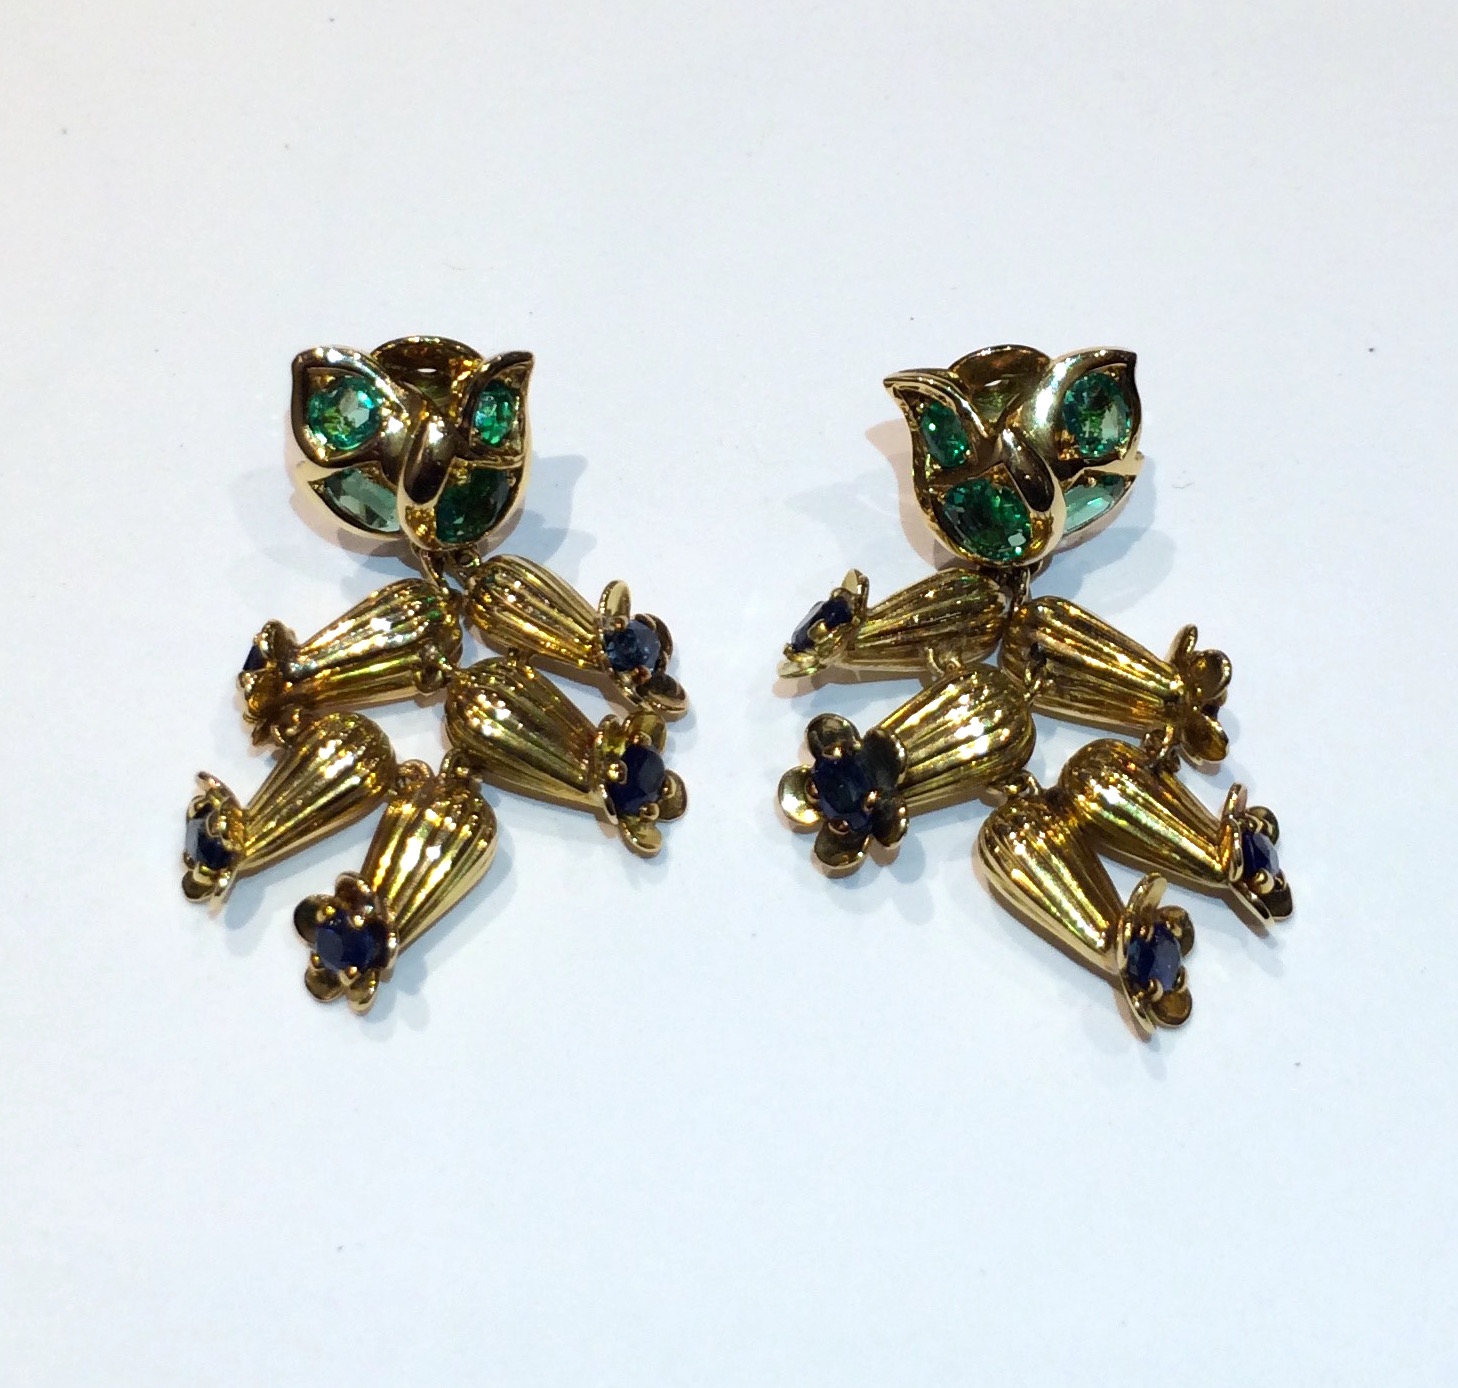 Cartier Paris, “Bluebell” earrings, 18K yellow gold set with emeralds and sapphires, signed c. 1950’s